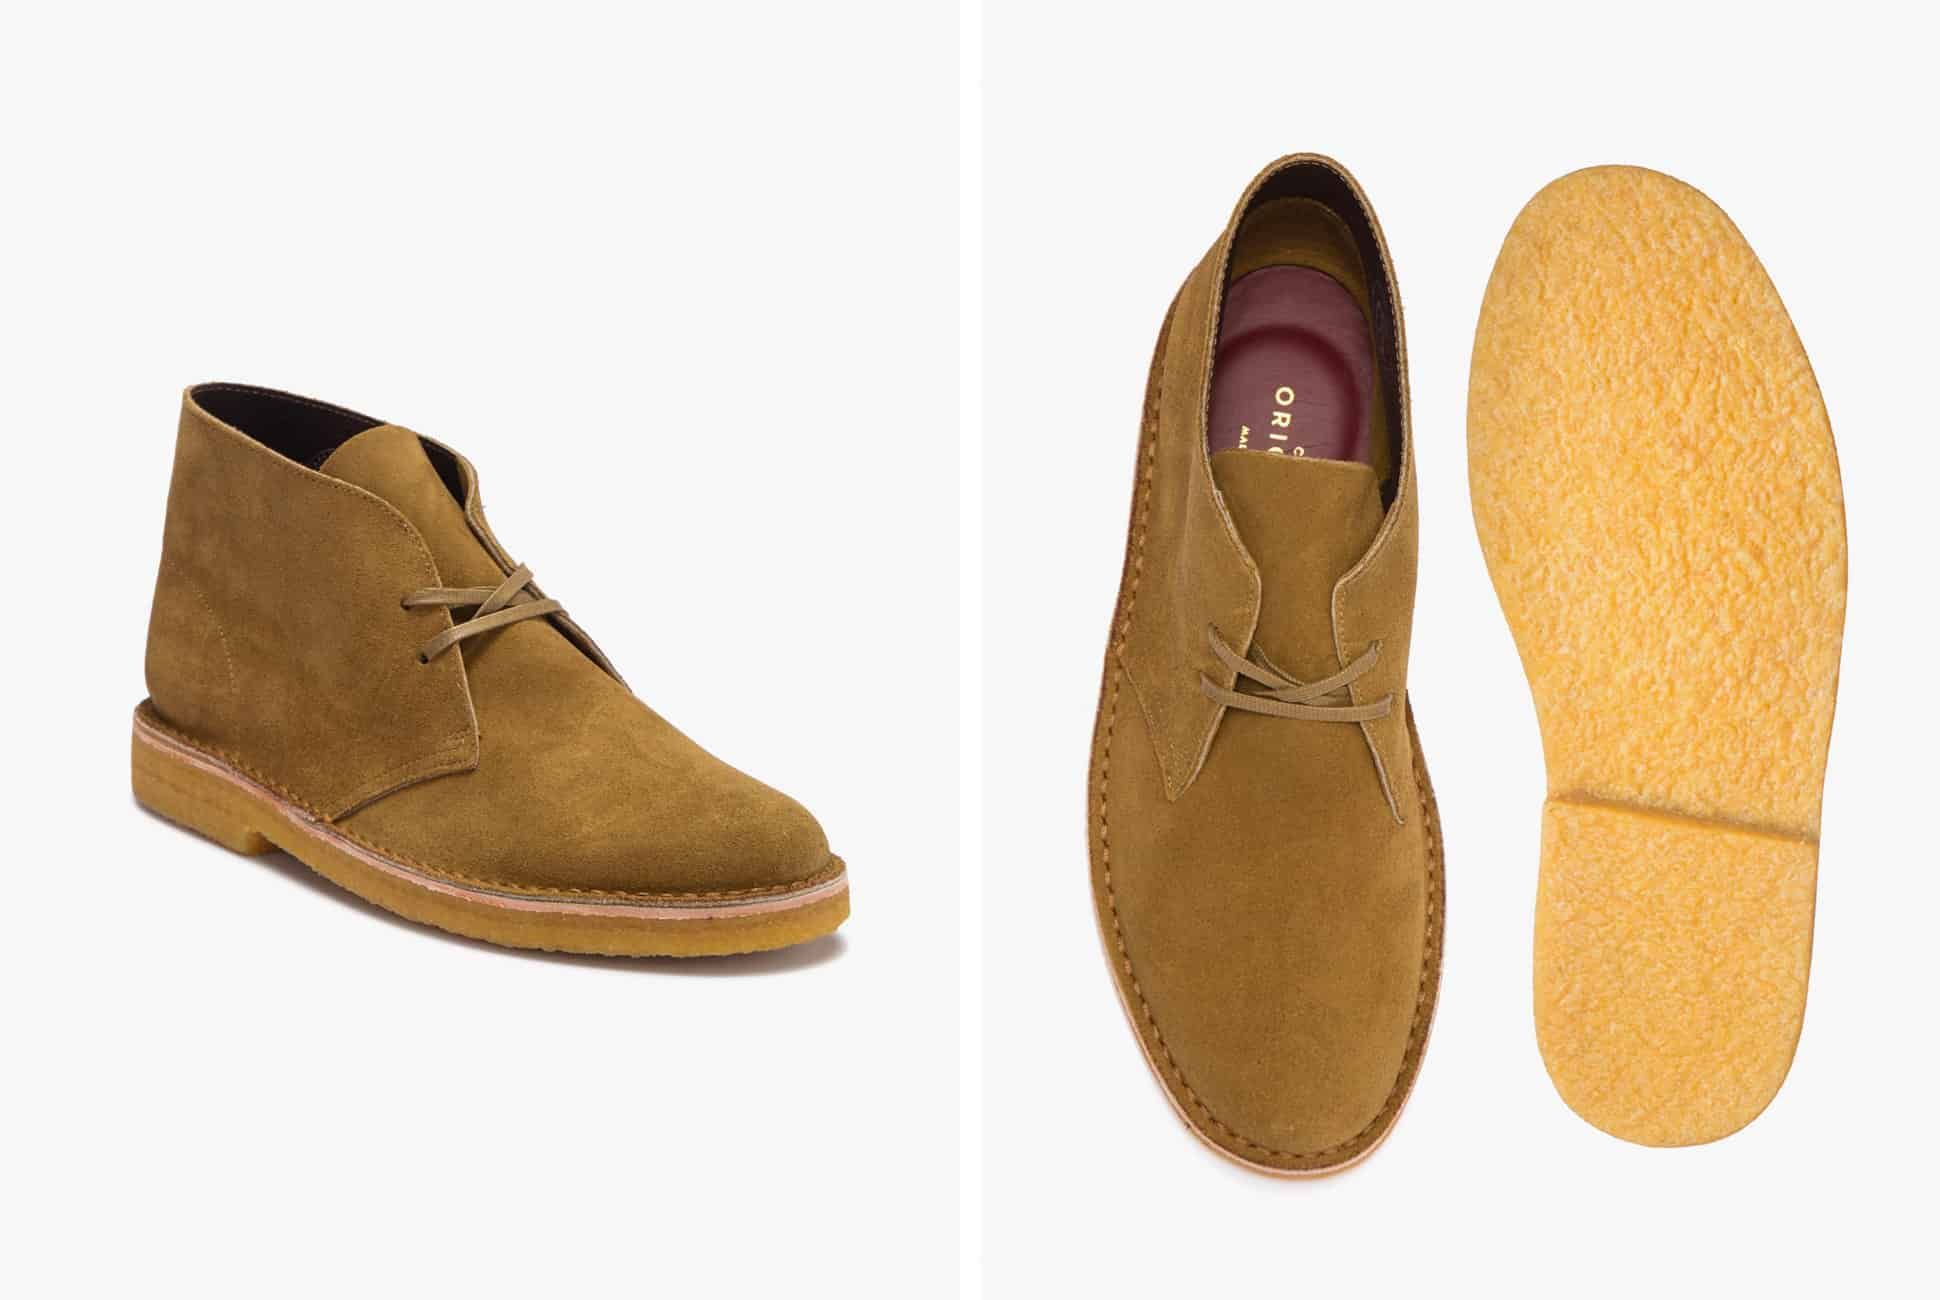 clarks made in italy desert boots 